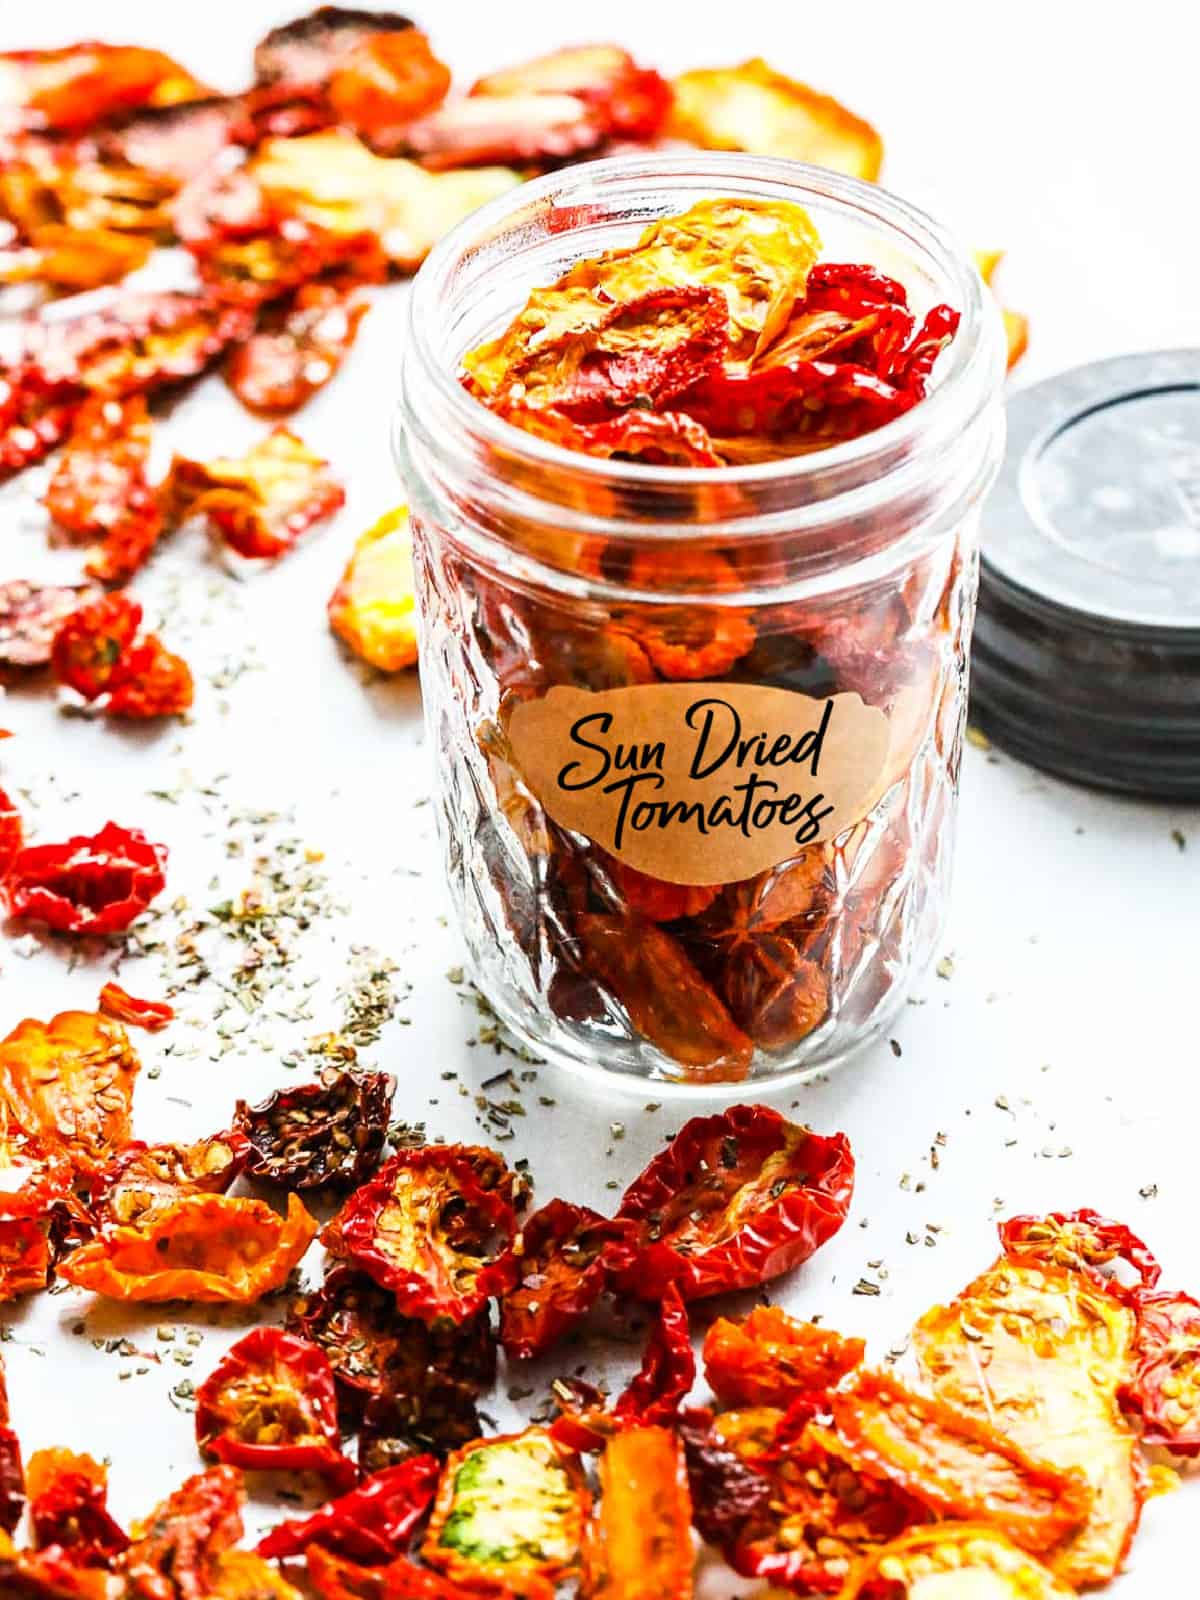 A small clear jar holding sun dried tomatoes with a label and them sprinkled on a table.